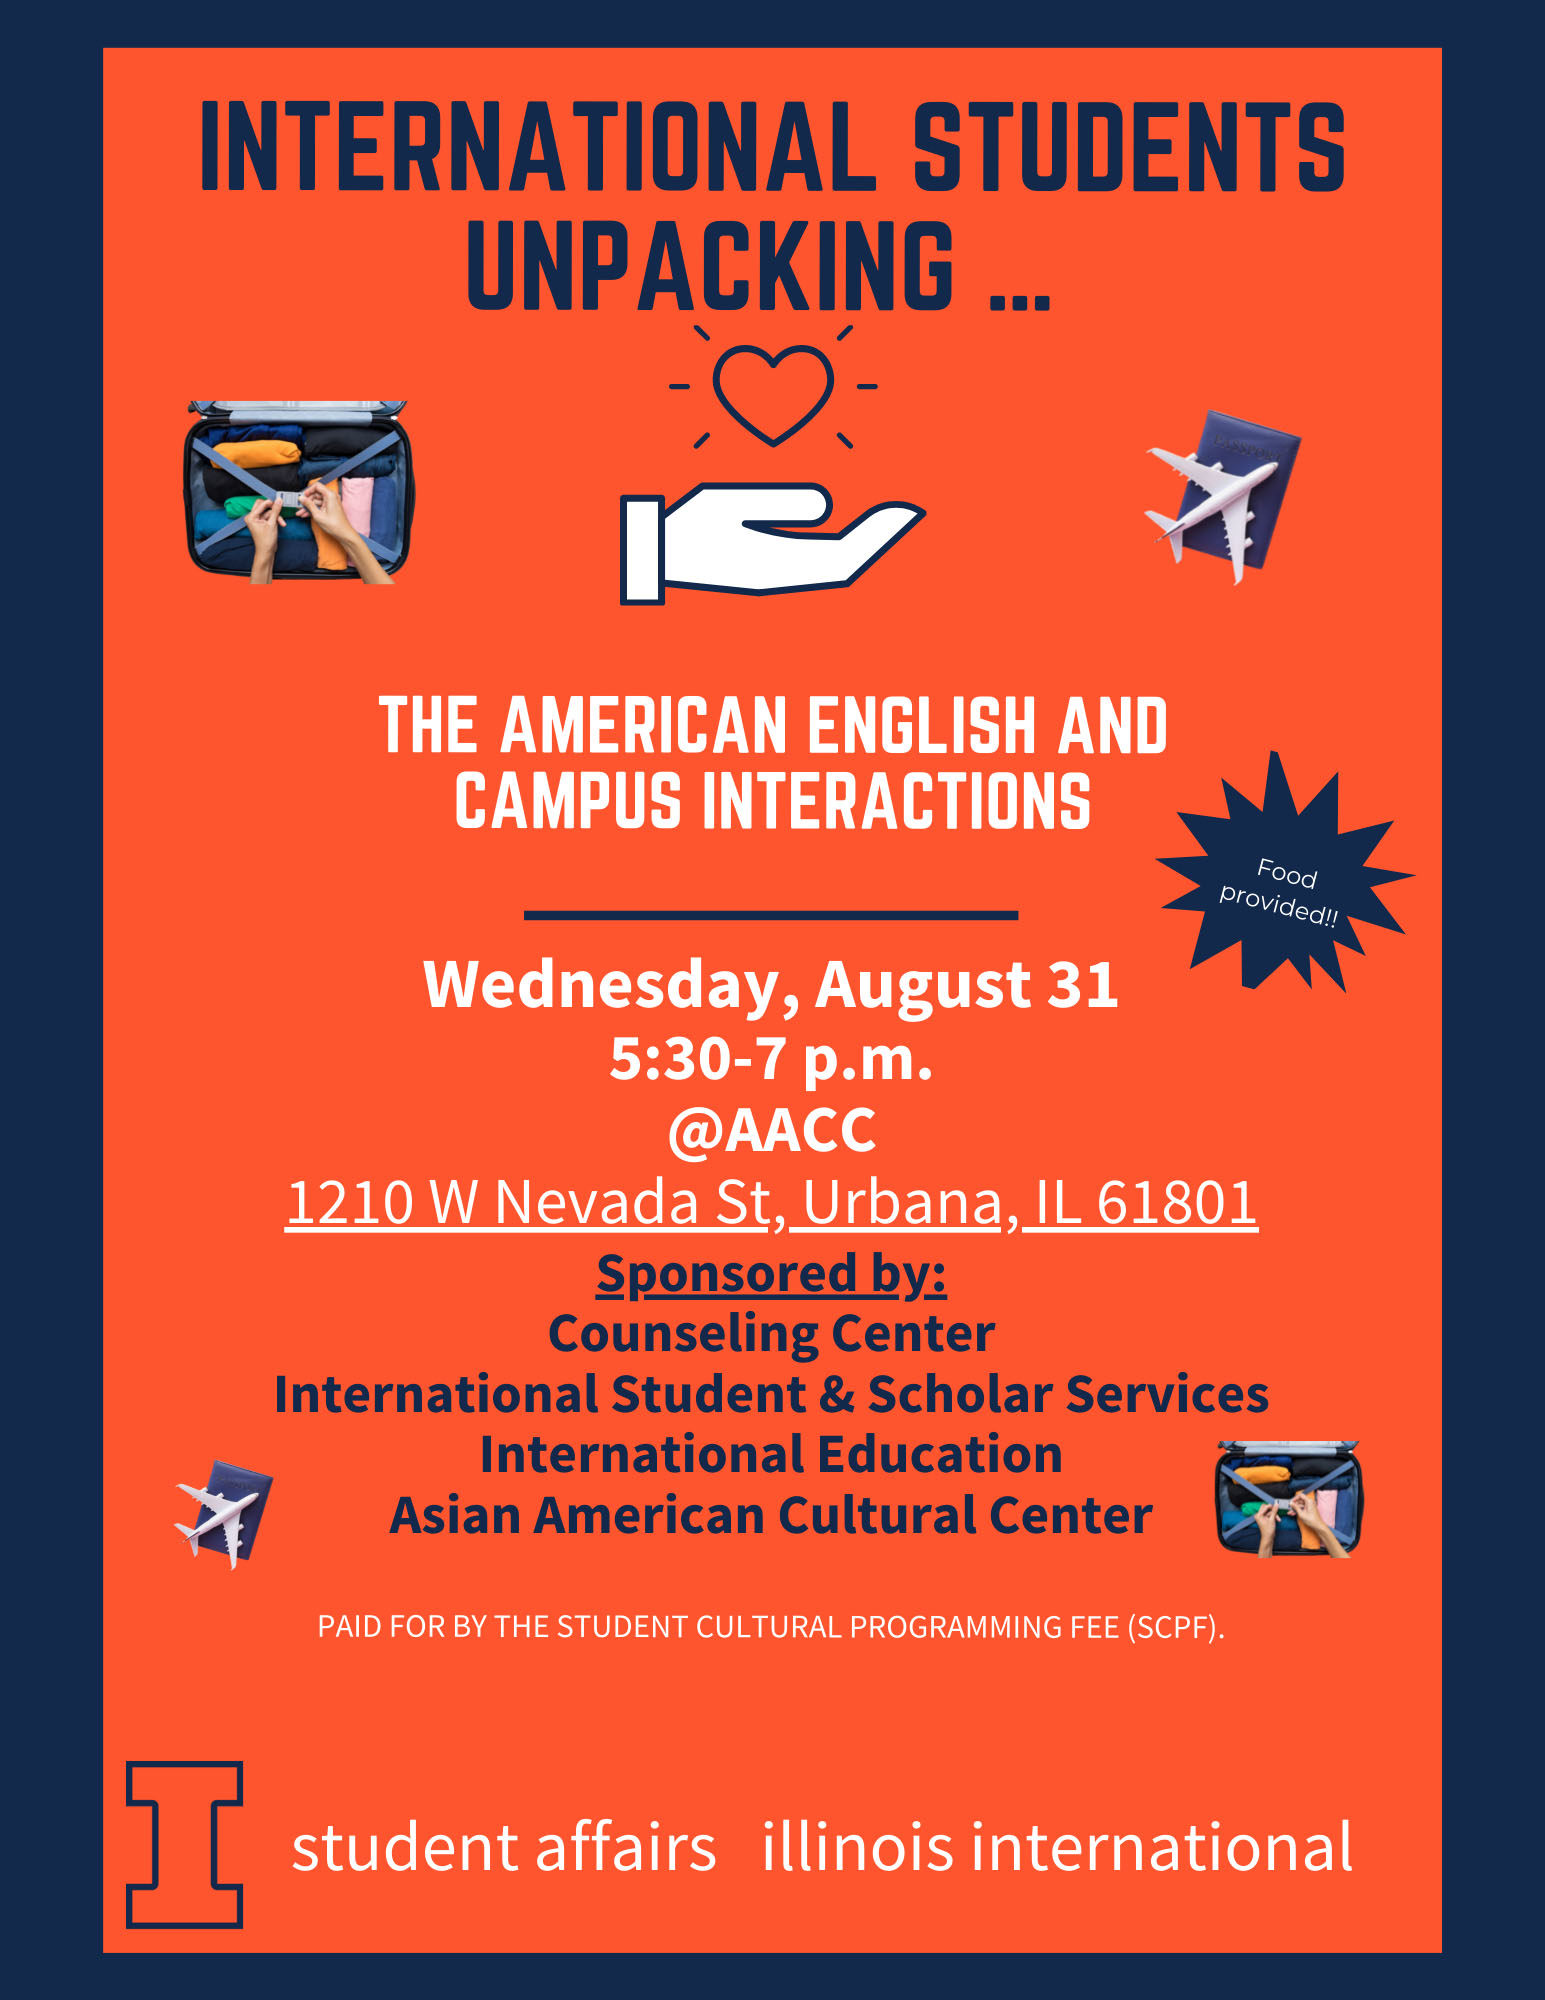 The International Student Outreach Team from the Counseling Center is hosting International Students Unpacking on Wednesday, August 31.  It will be at the Asian American Cultural Center located at 1210 W Nevada St in Urbana.